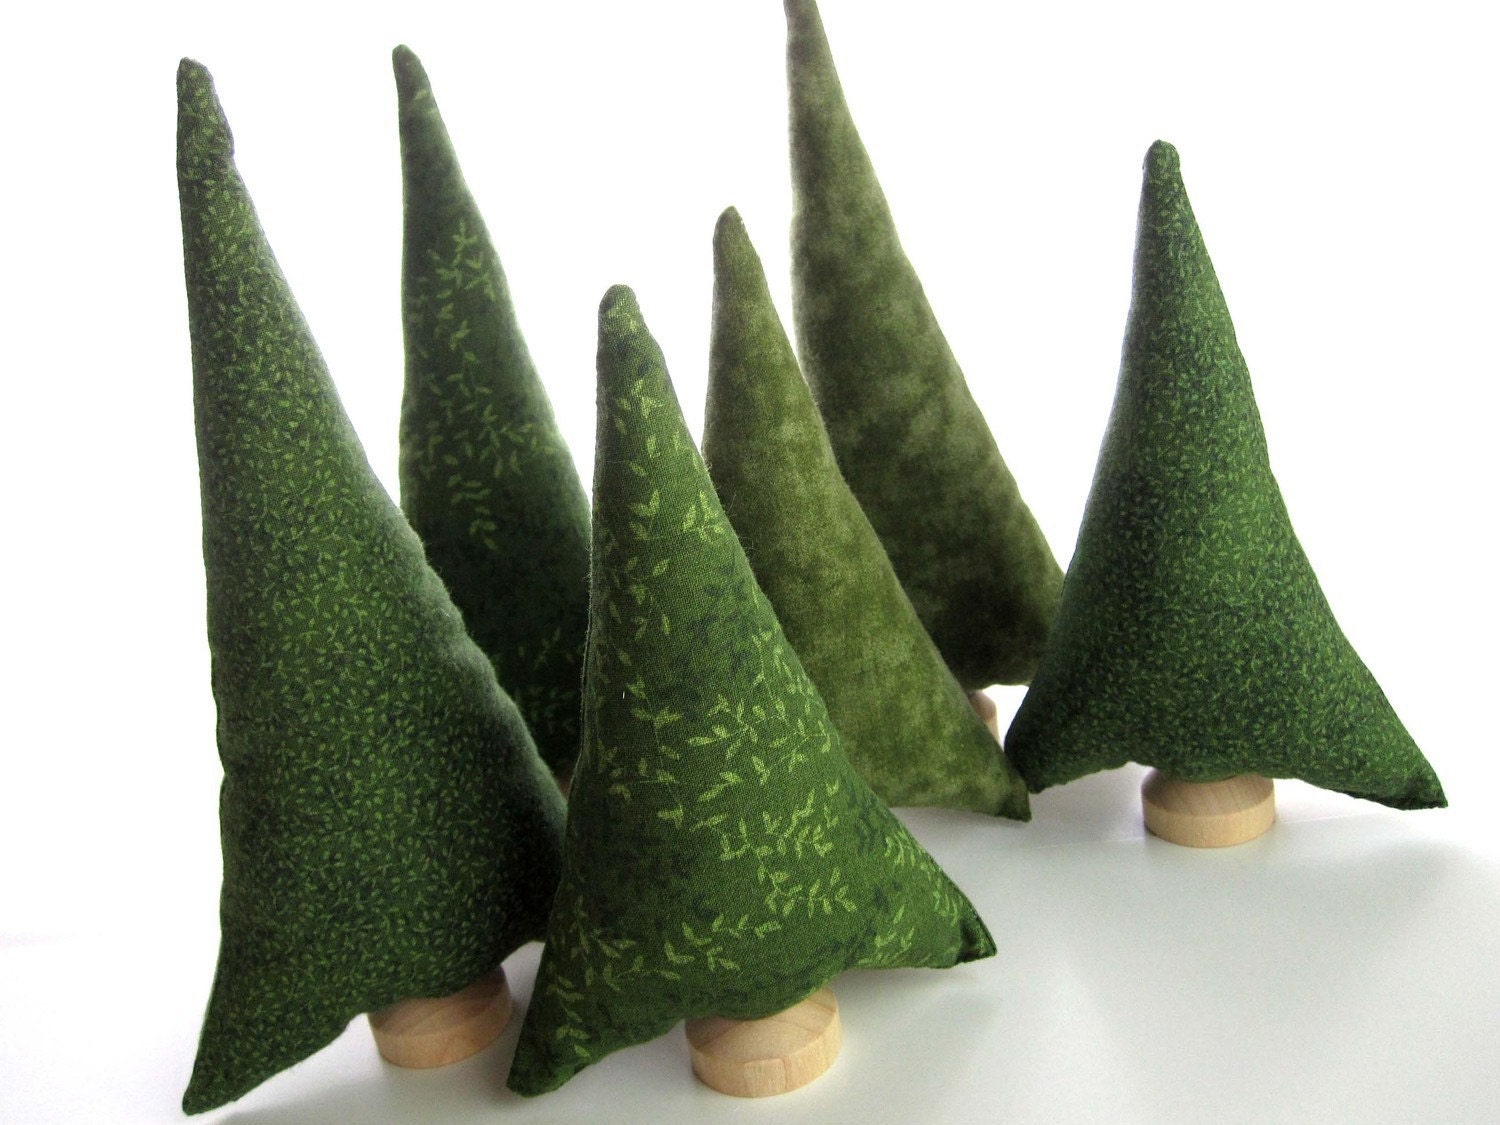 Evergreen Trees - tiny forest of 6 natural green spruce or pine fabric trees